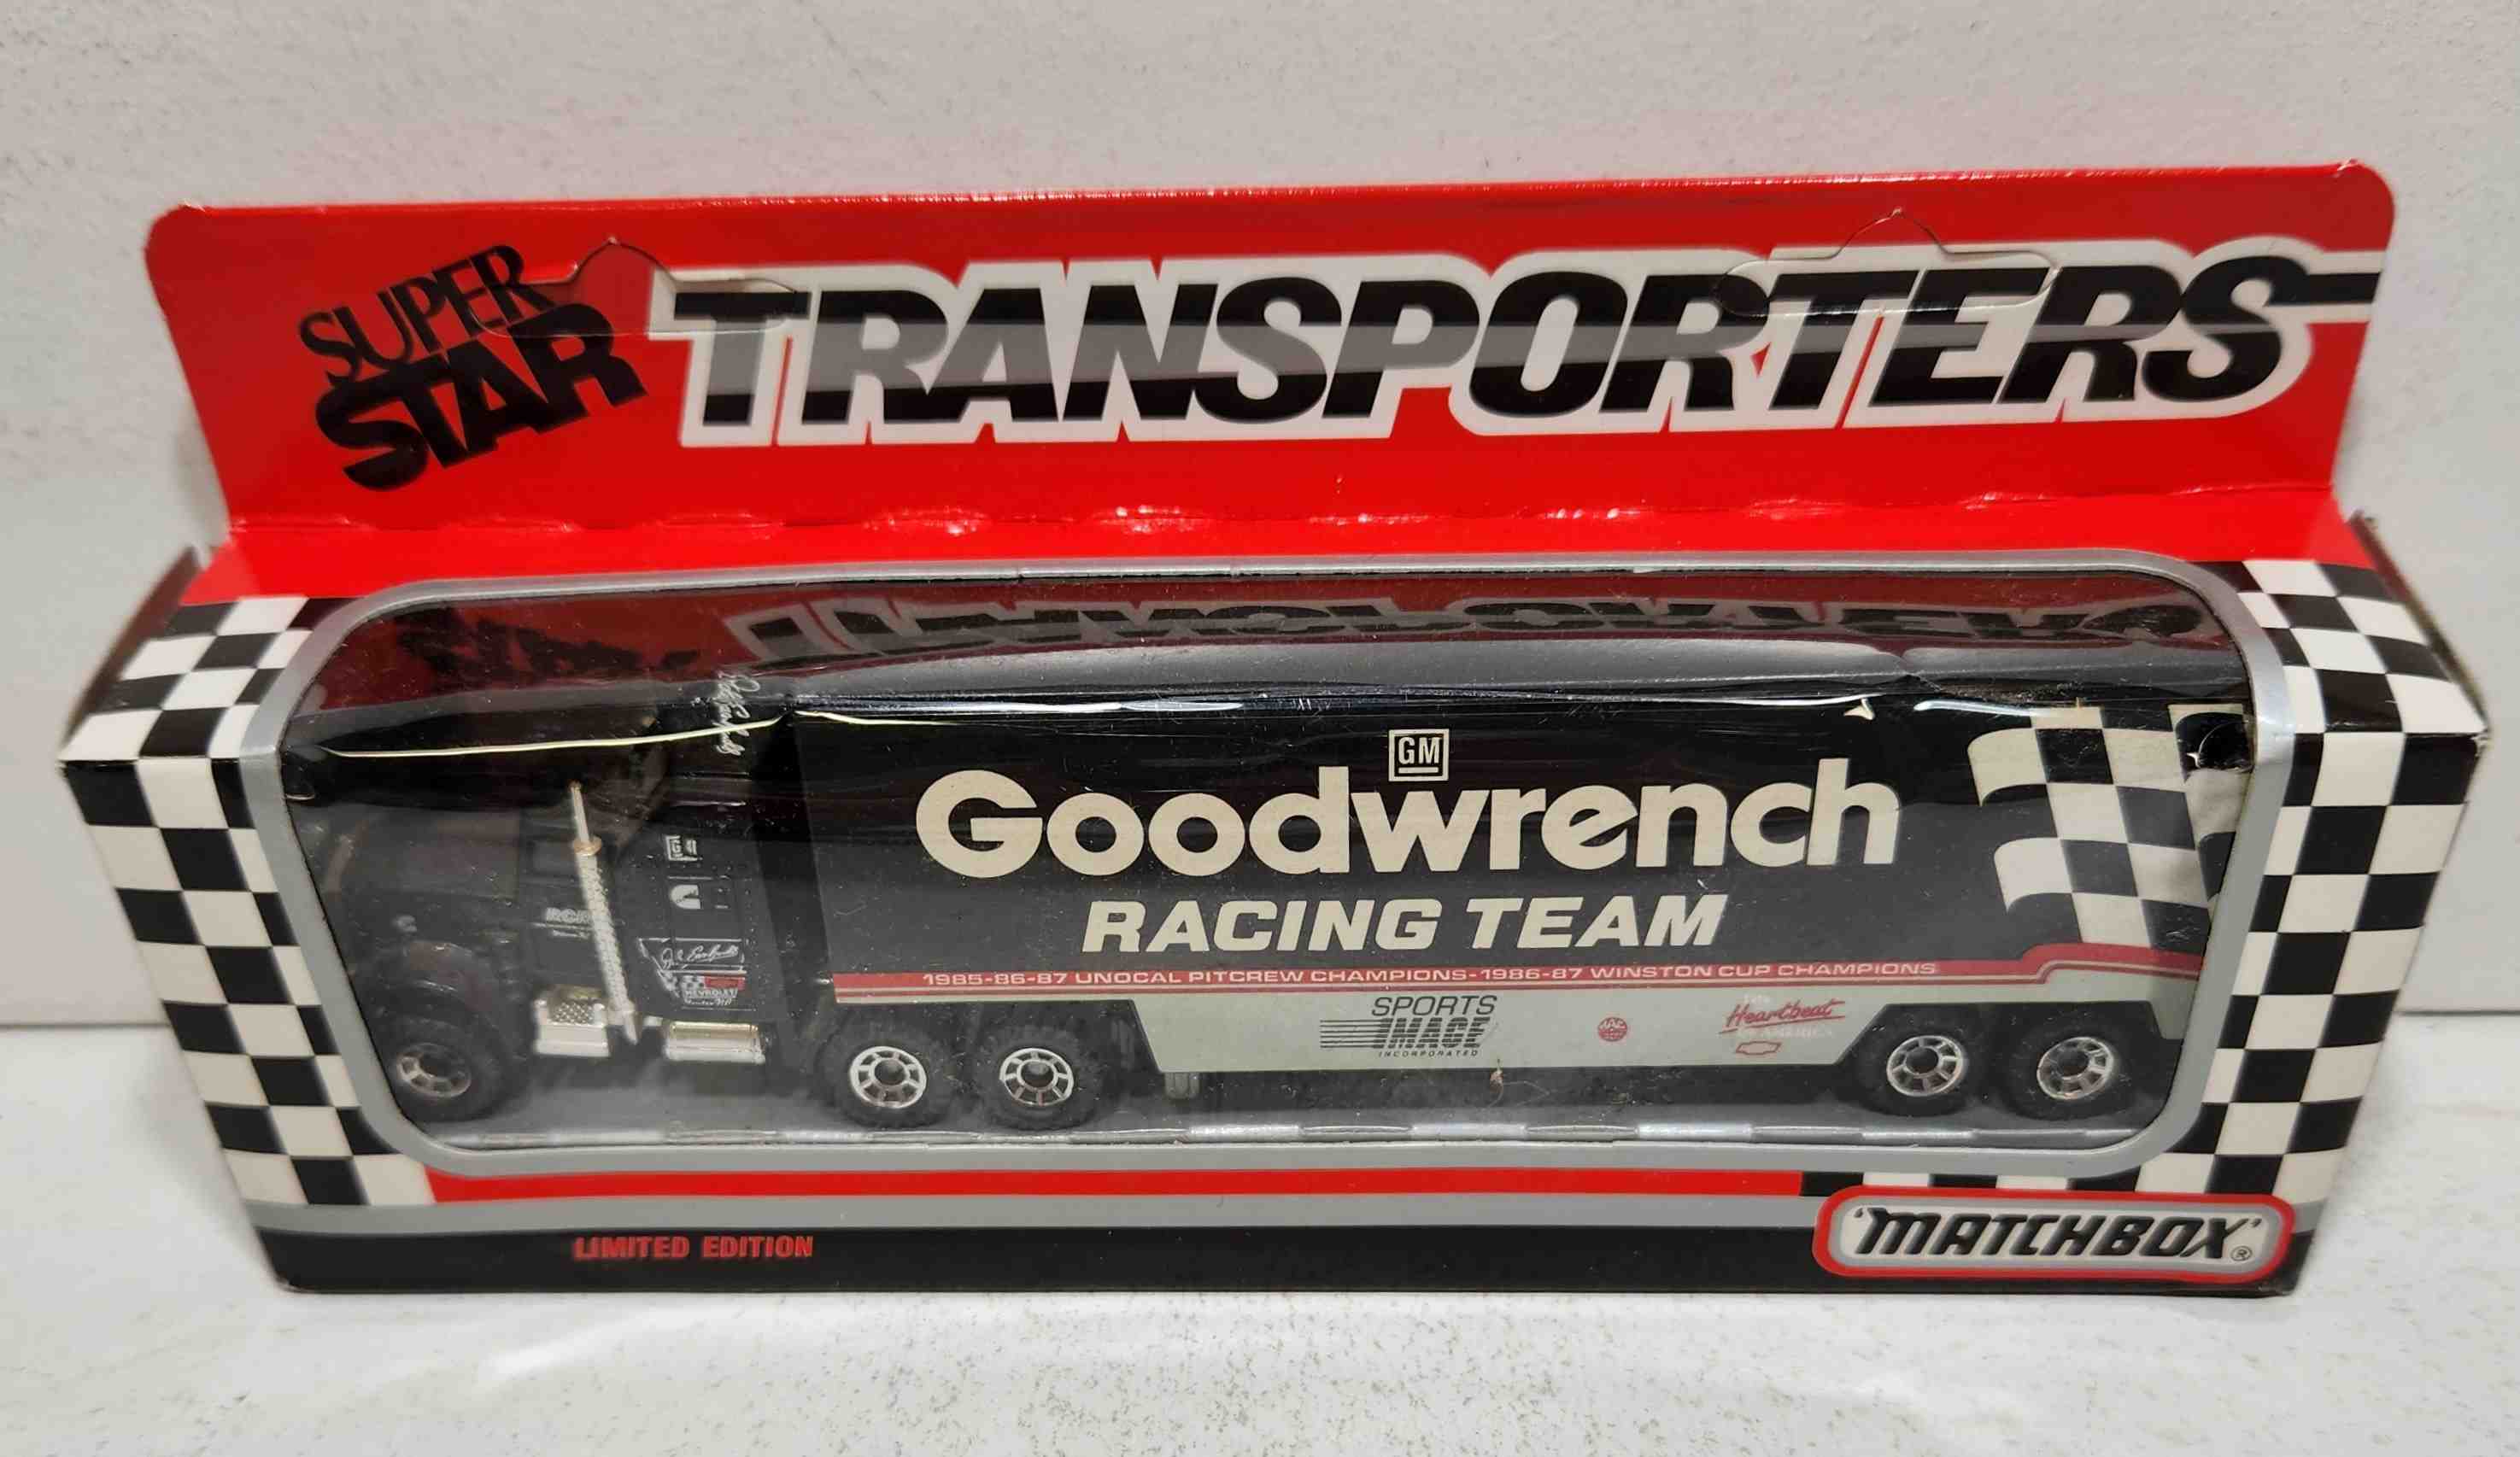 1989 Dale Earnhardt 1/87th Goodwrench Racing Team transporter